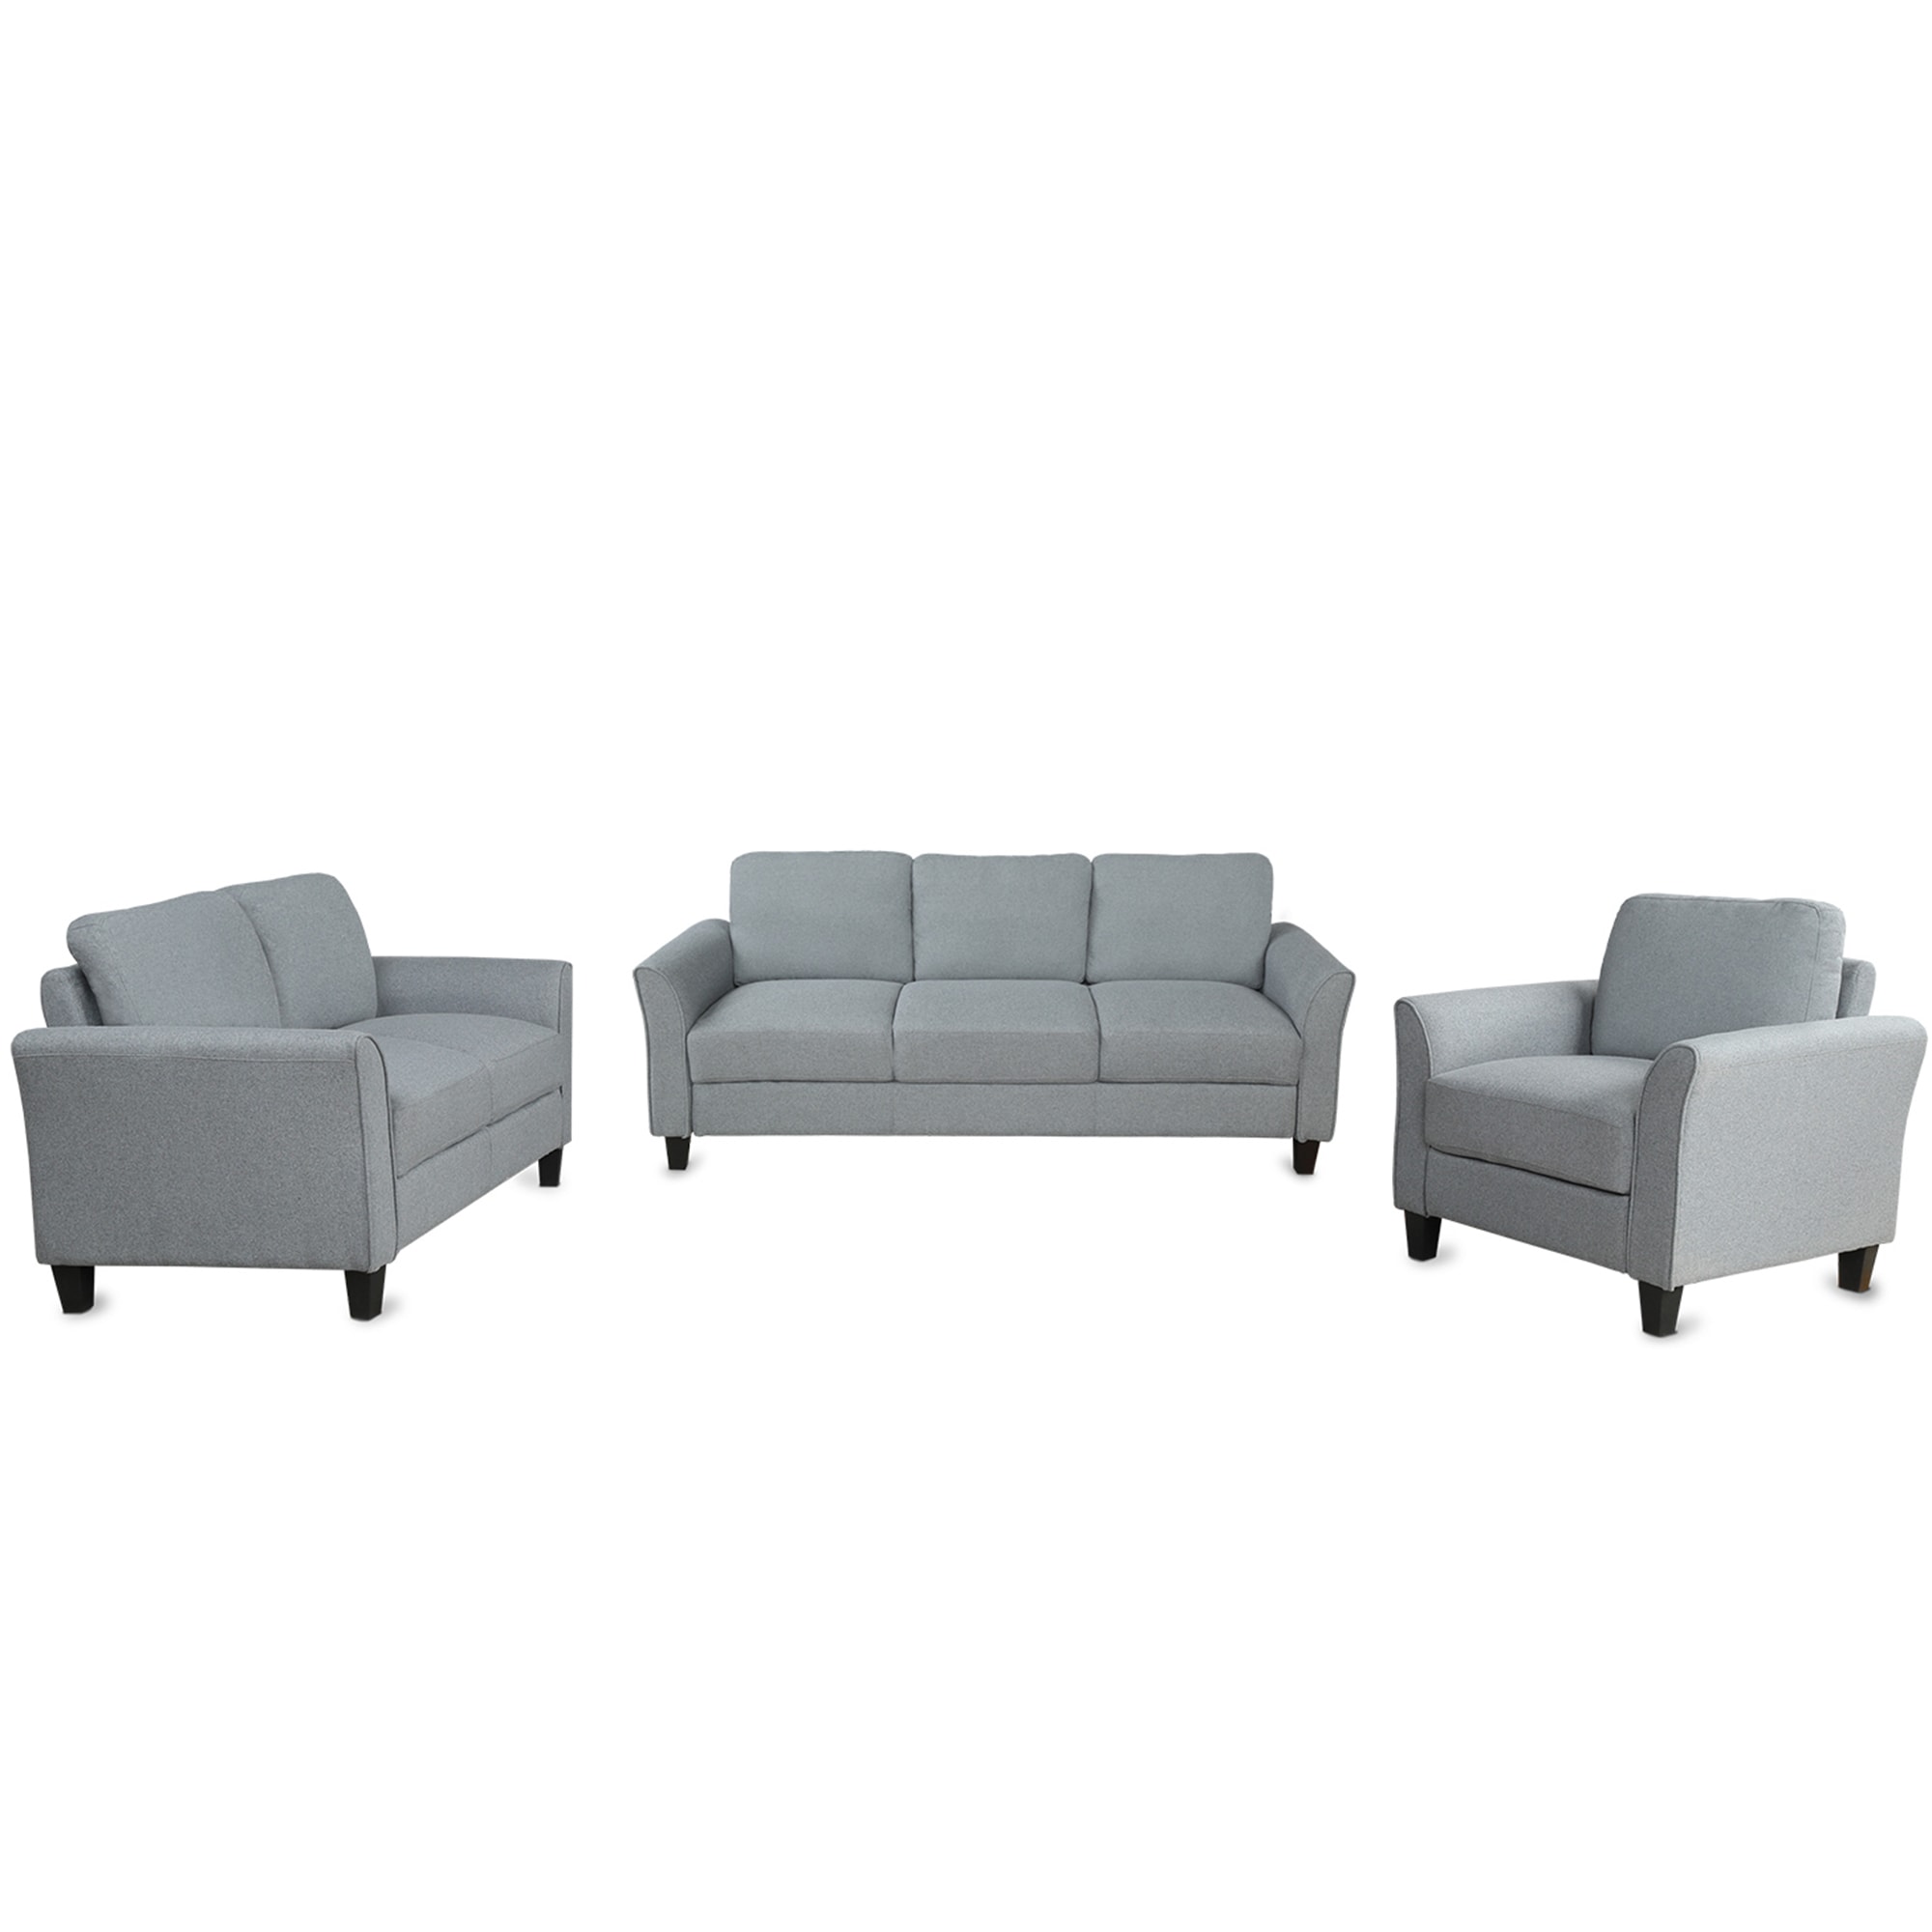 donor topic Opiate Clihome Sofa Set (1+2+3 Seat) Modern 3-Piece Velvet Blue Living Room Set in  the Living Room Sets department at Lowes.com